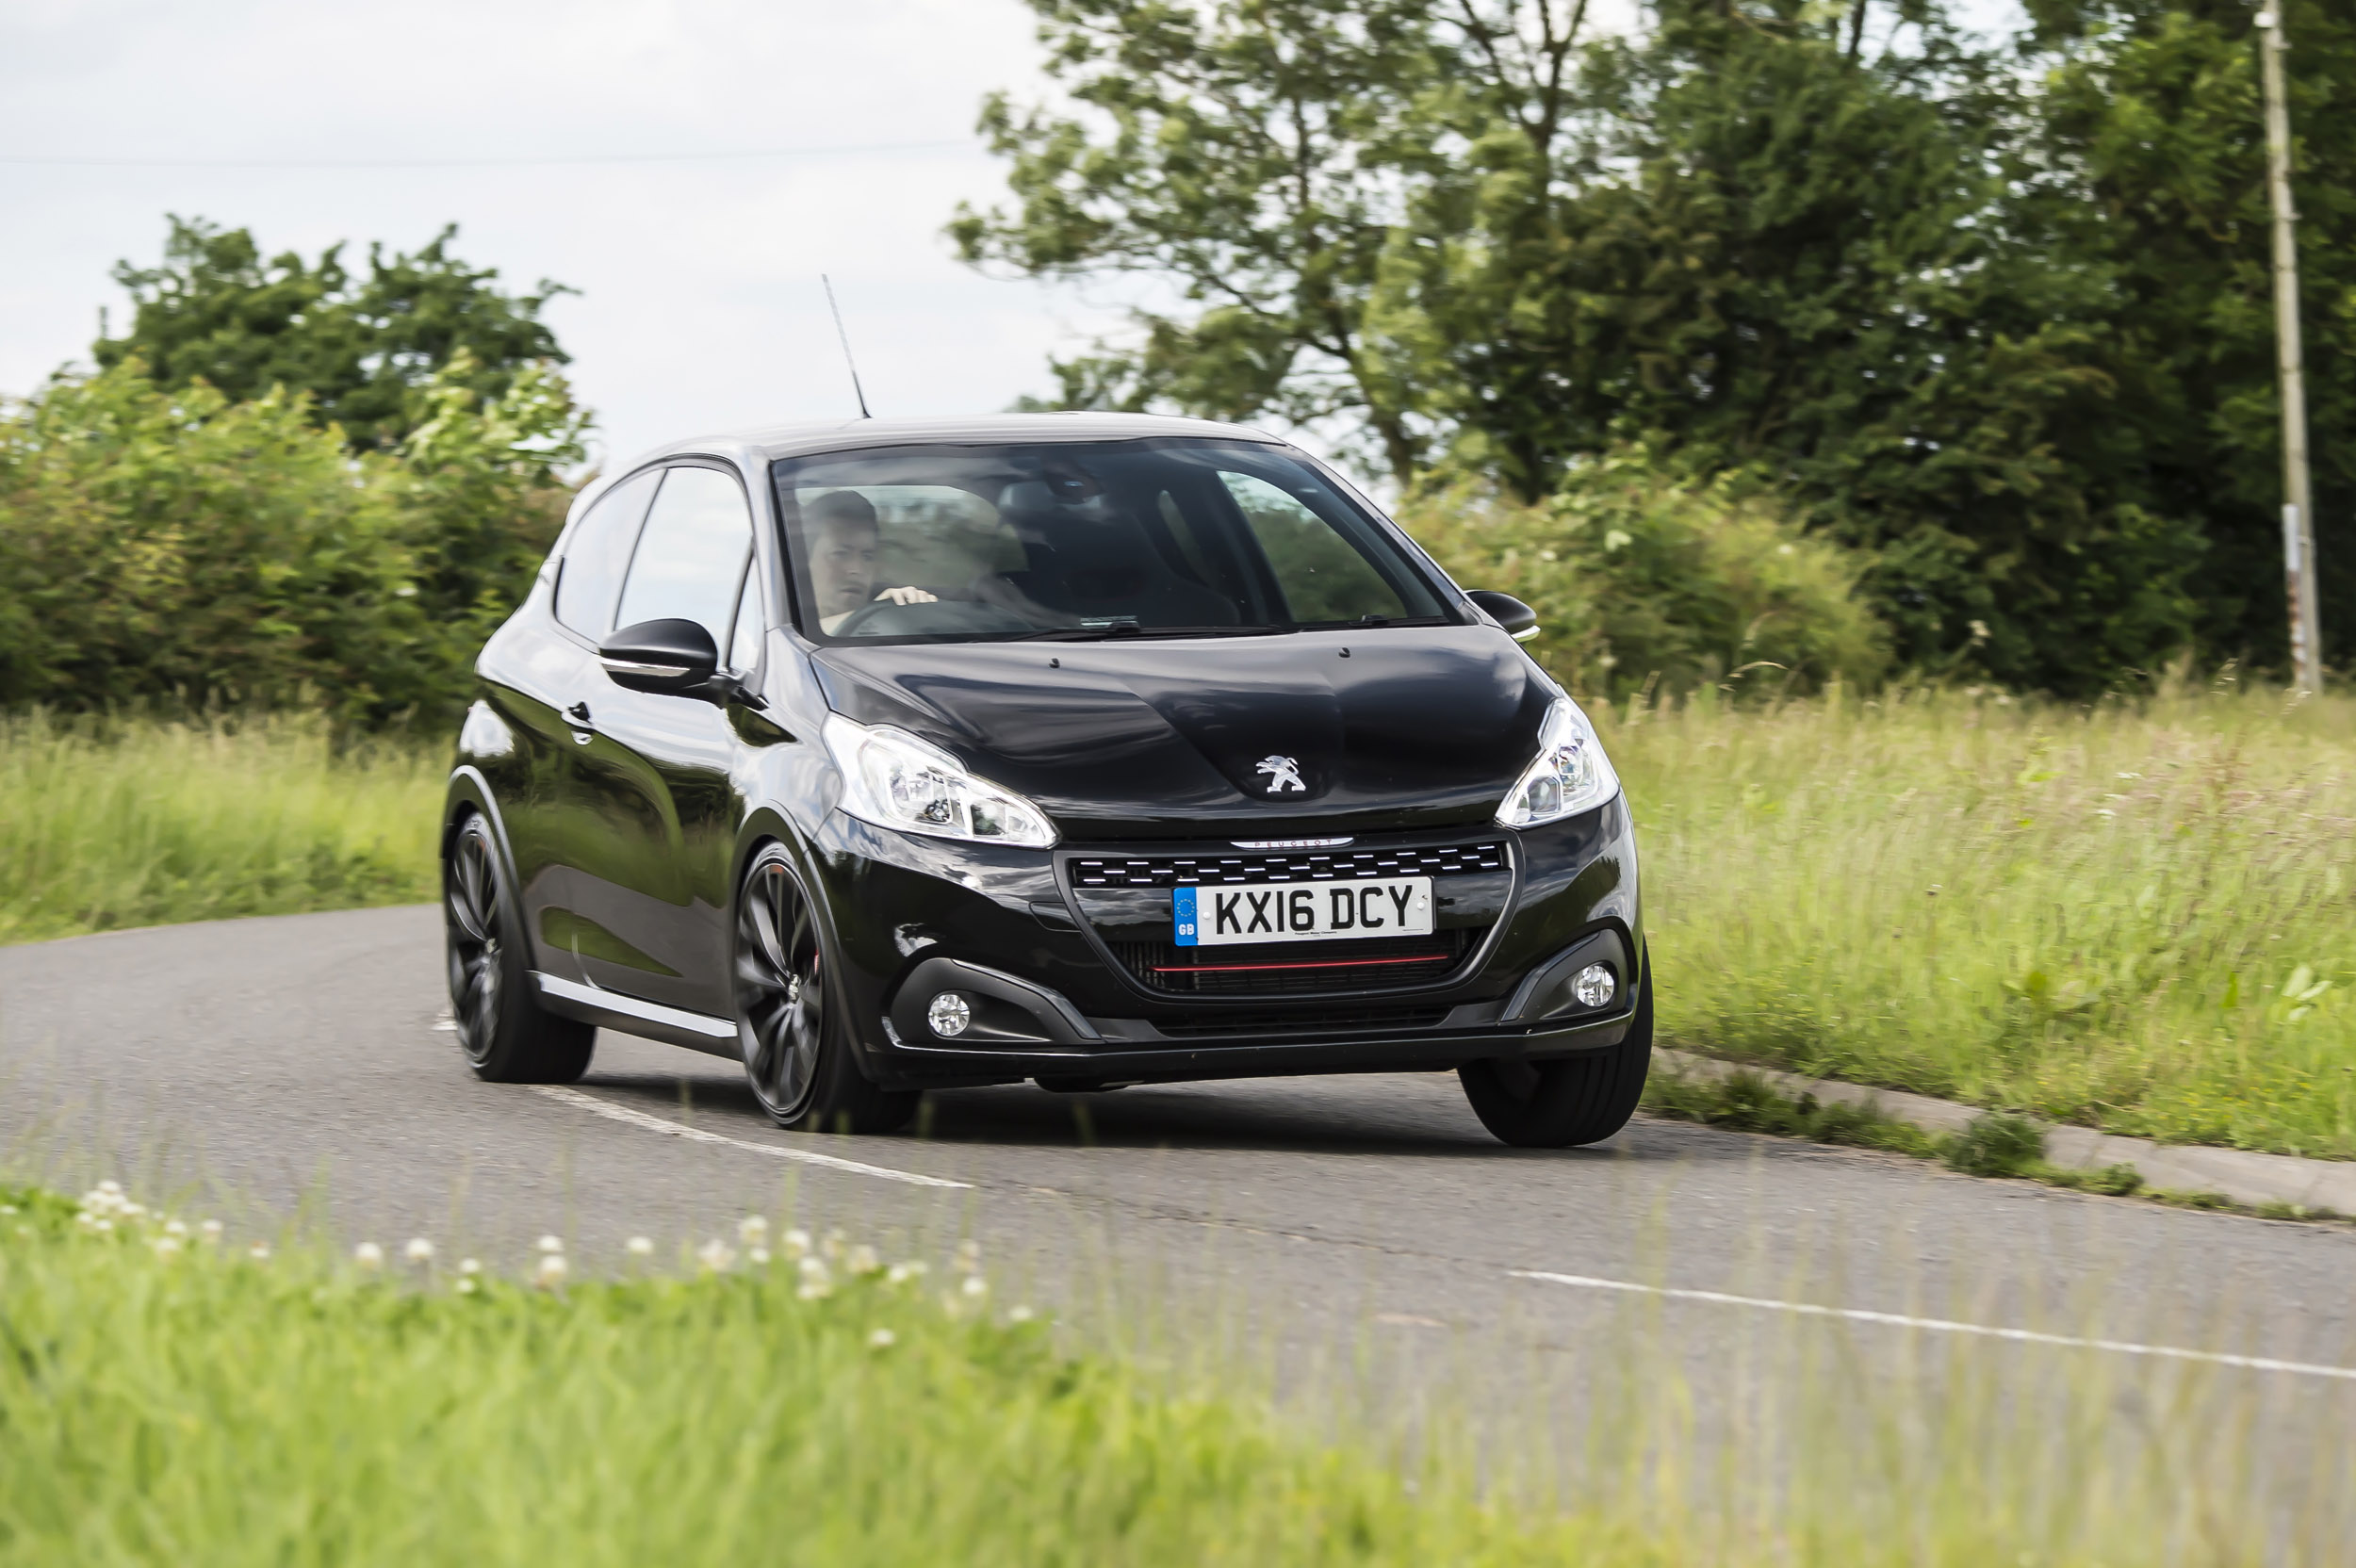 Peugeot 208 Gti And Gti By Peugeot Sport Review Prices Specs And 0 60 Time Evo